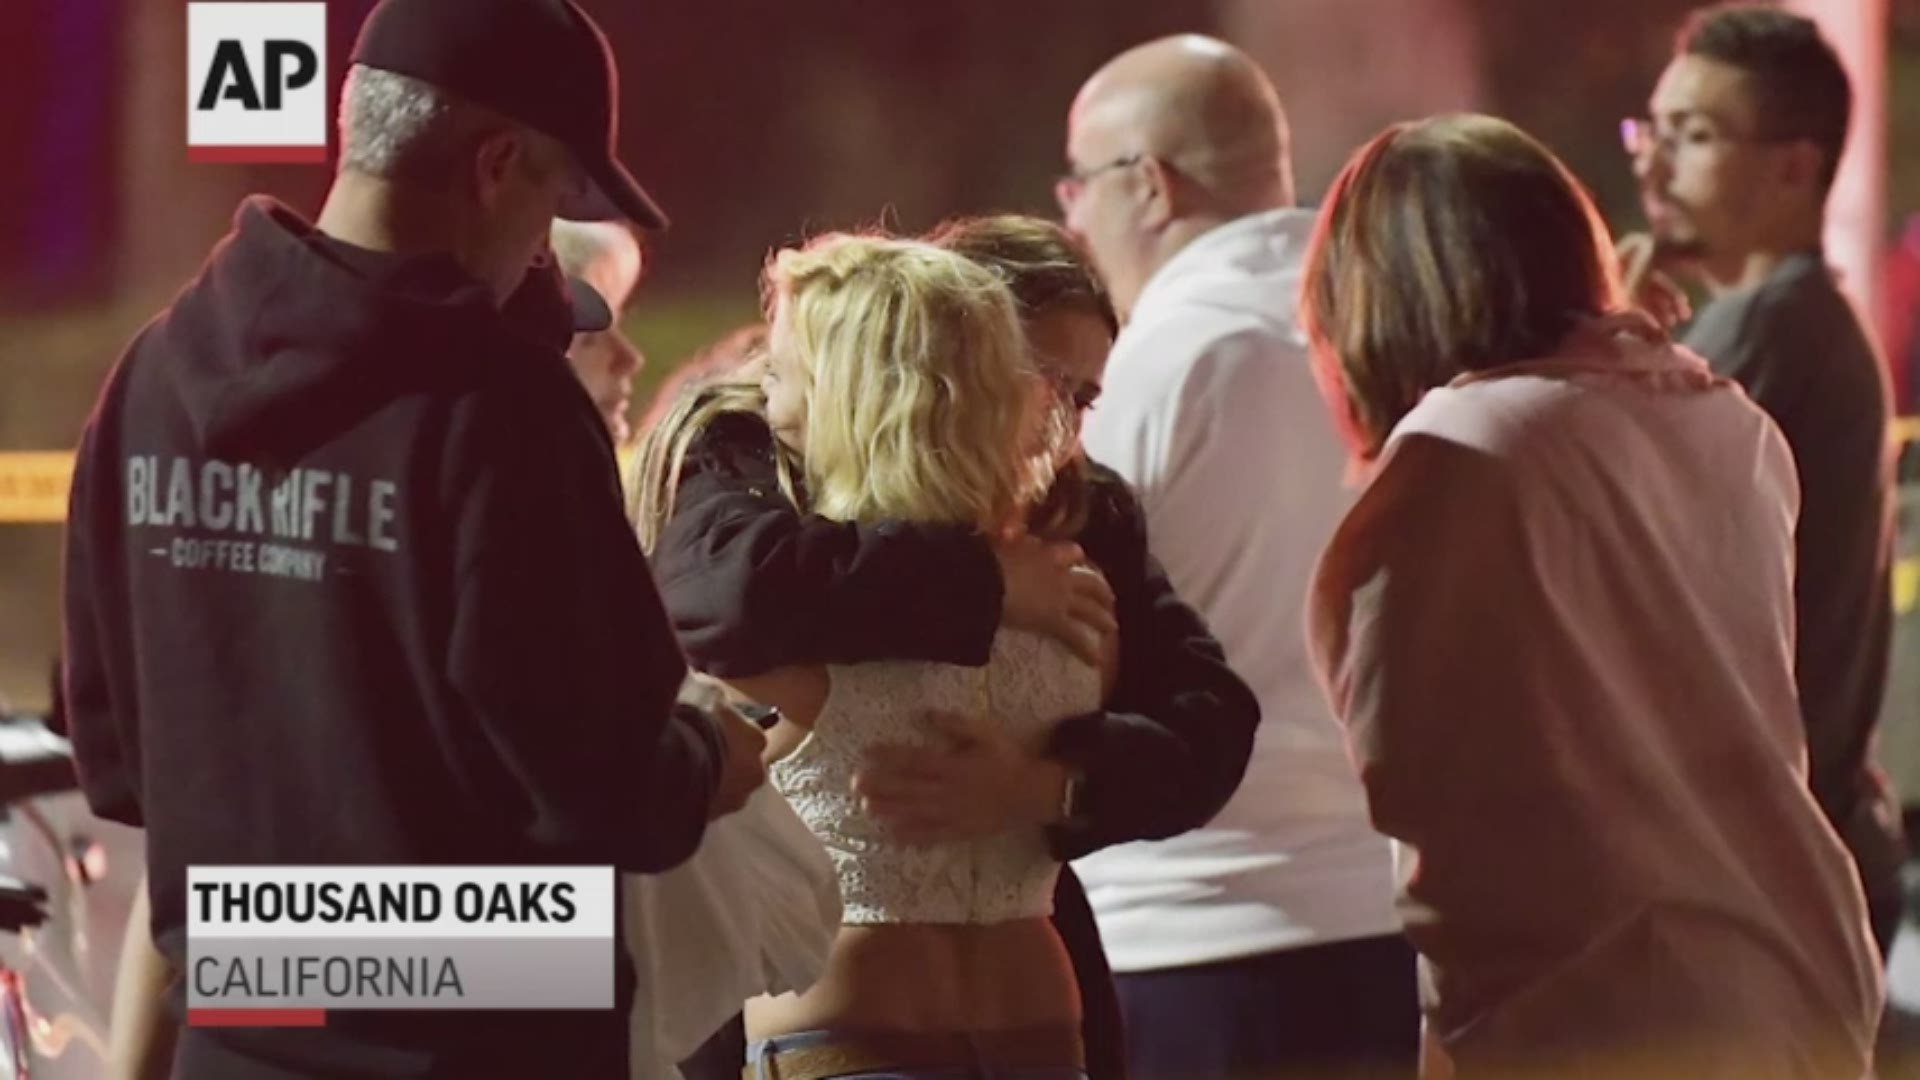 Thousand Oaks mayor pro tem, Rob McCoy, who is also a minister says, "Everybody in this wonderful city of Thousand Oaks is going to love on these folks." (Courtesy KABC via AP)